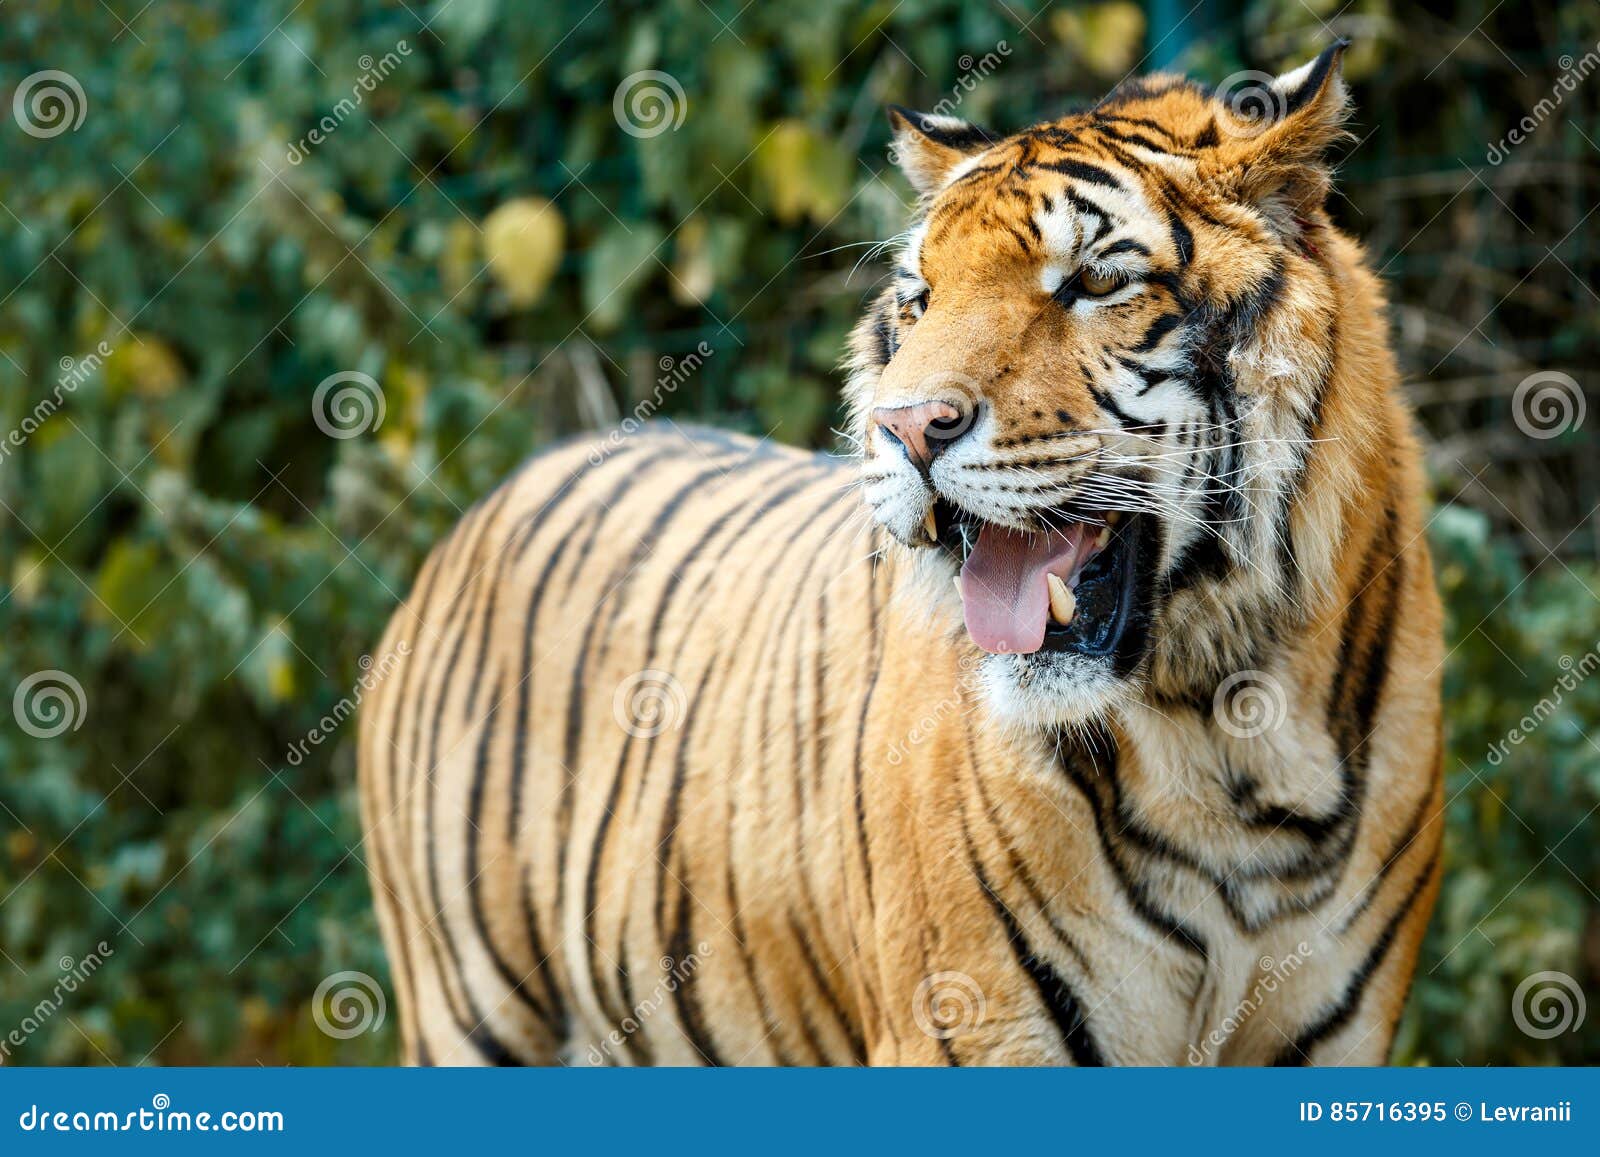 Bengal Tiger In Summer Day Stock Image Image Of Close 85716395